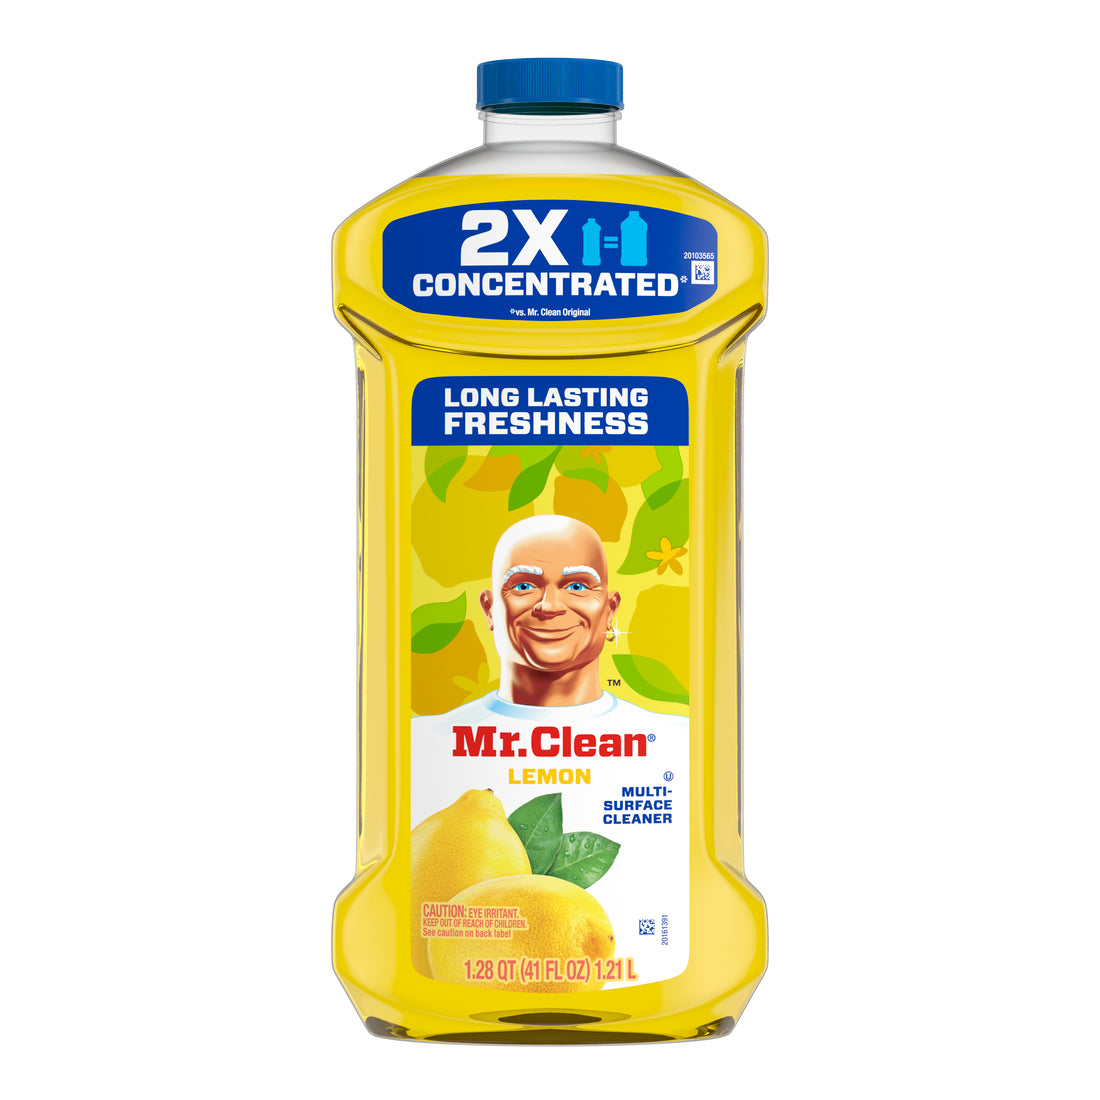 Mr. Clean 2X Concentrated Multi Surface Cleaner with Lemon Scent - 41oz/6pk